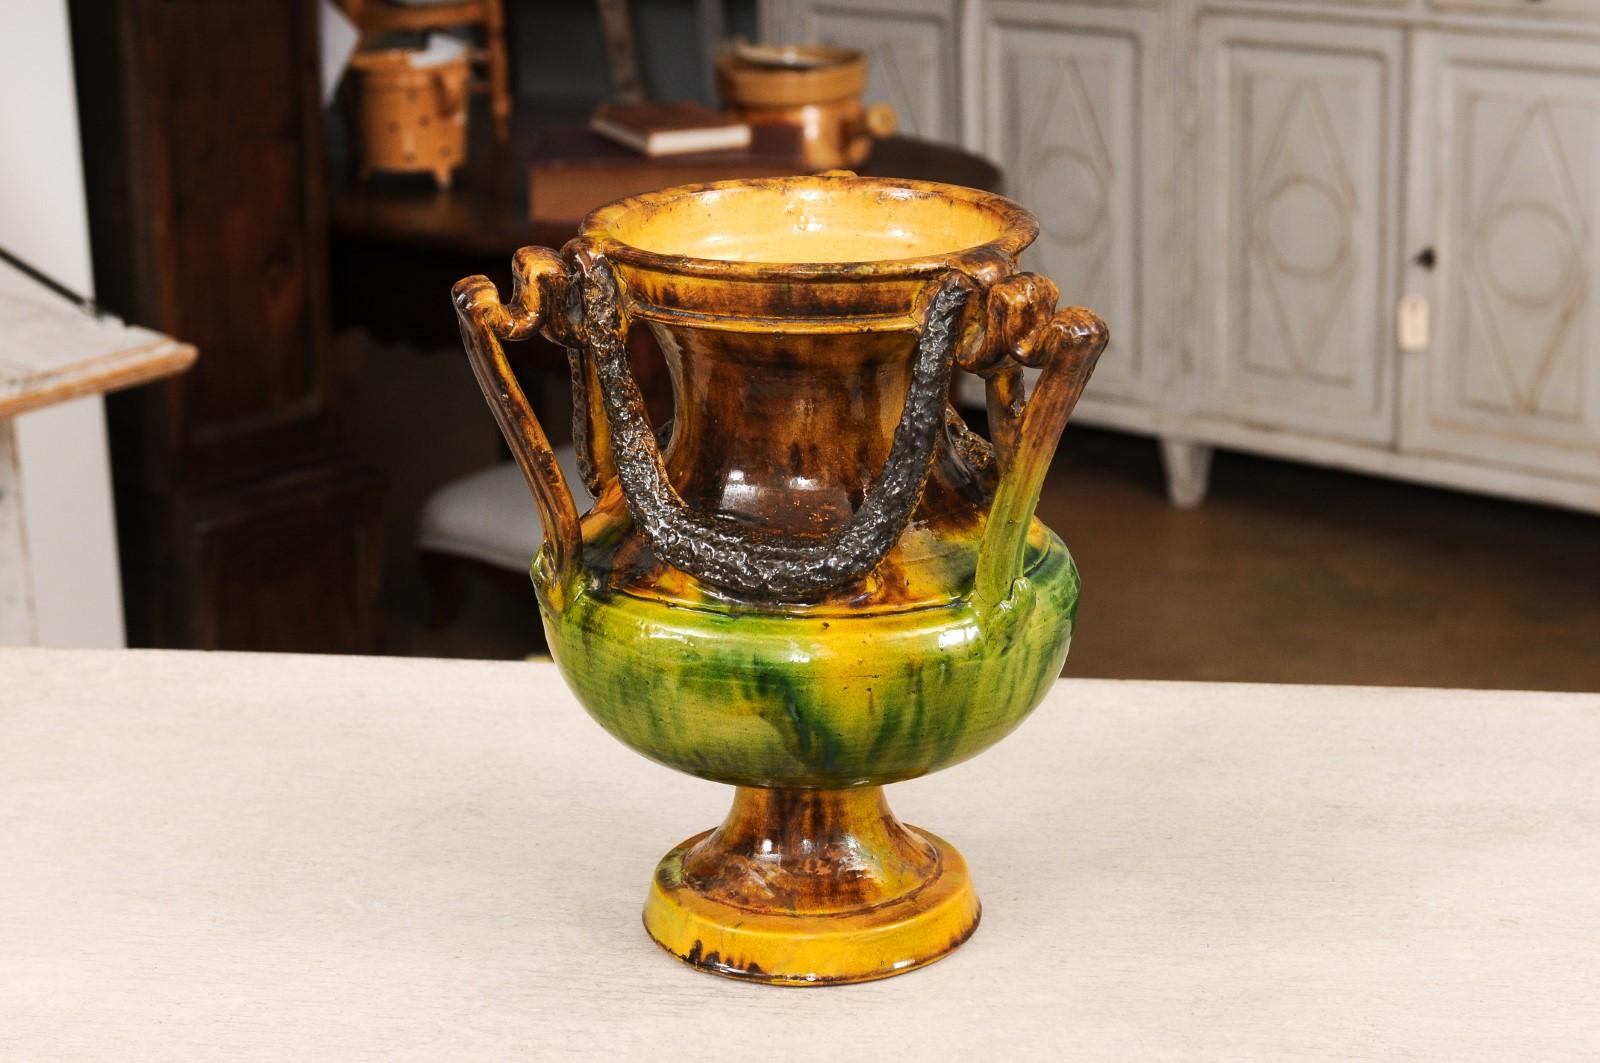 French Provincial French Classical 19th Century Anduze Multi-Colored Glazed Vase with Swag Motifs For Sale